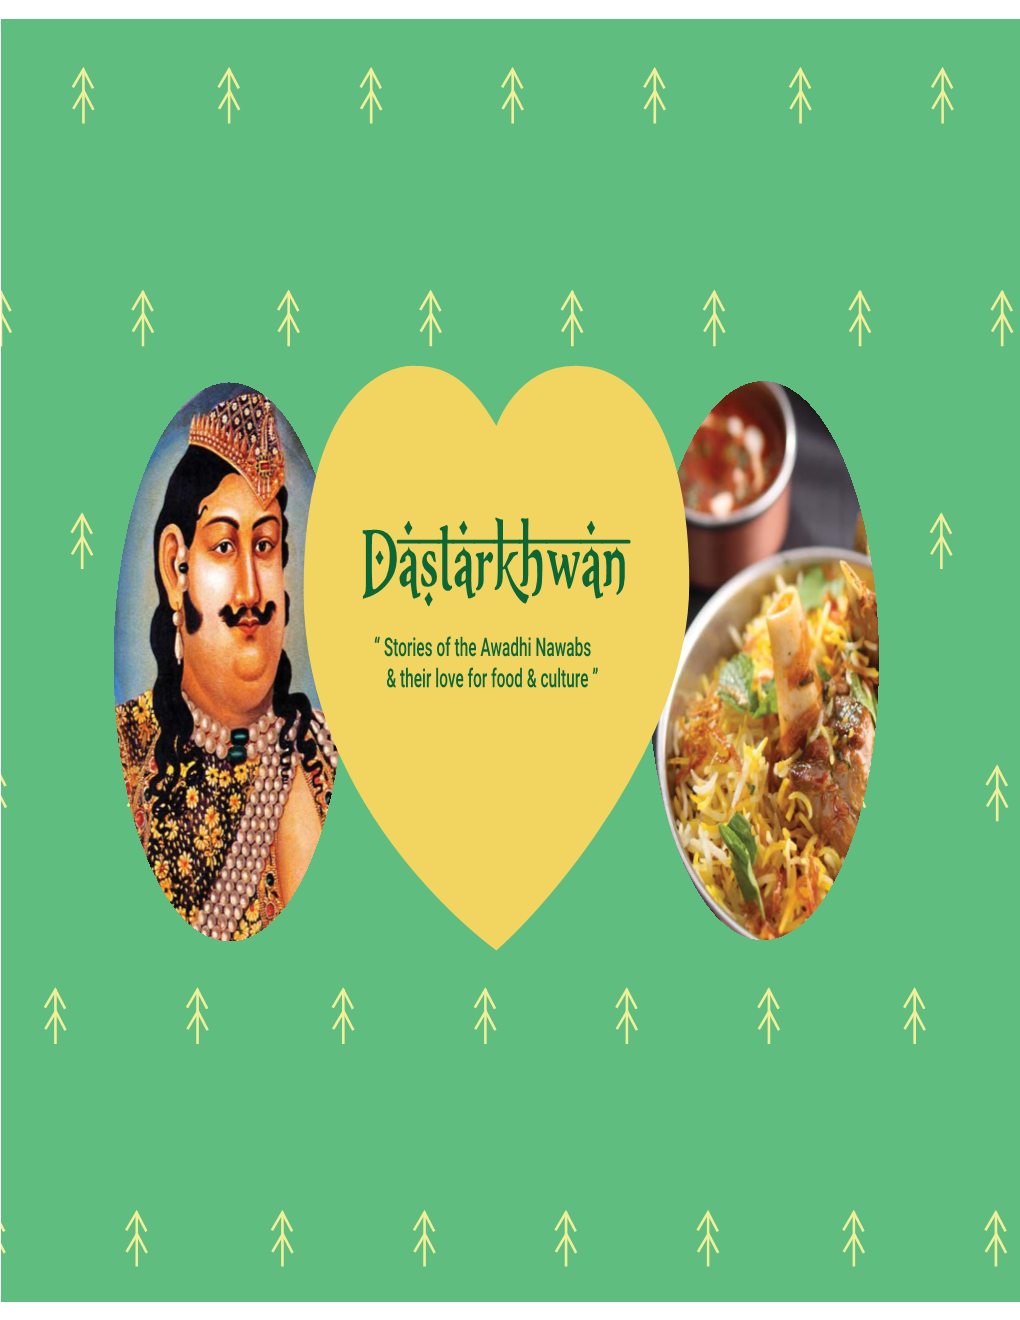 Dastarkhwan “ Stories of the Awadhi Nawabs & Their Love for Food & Culture ”